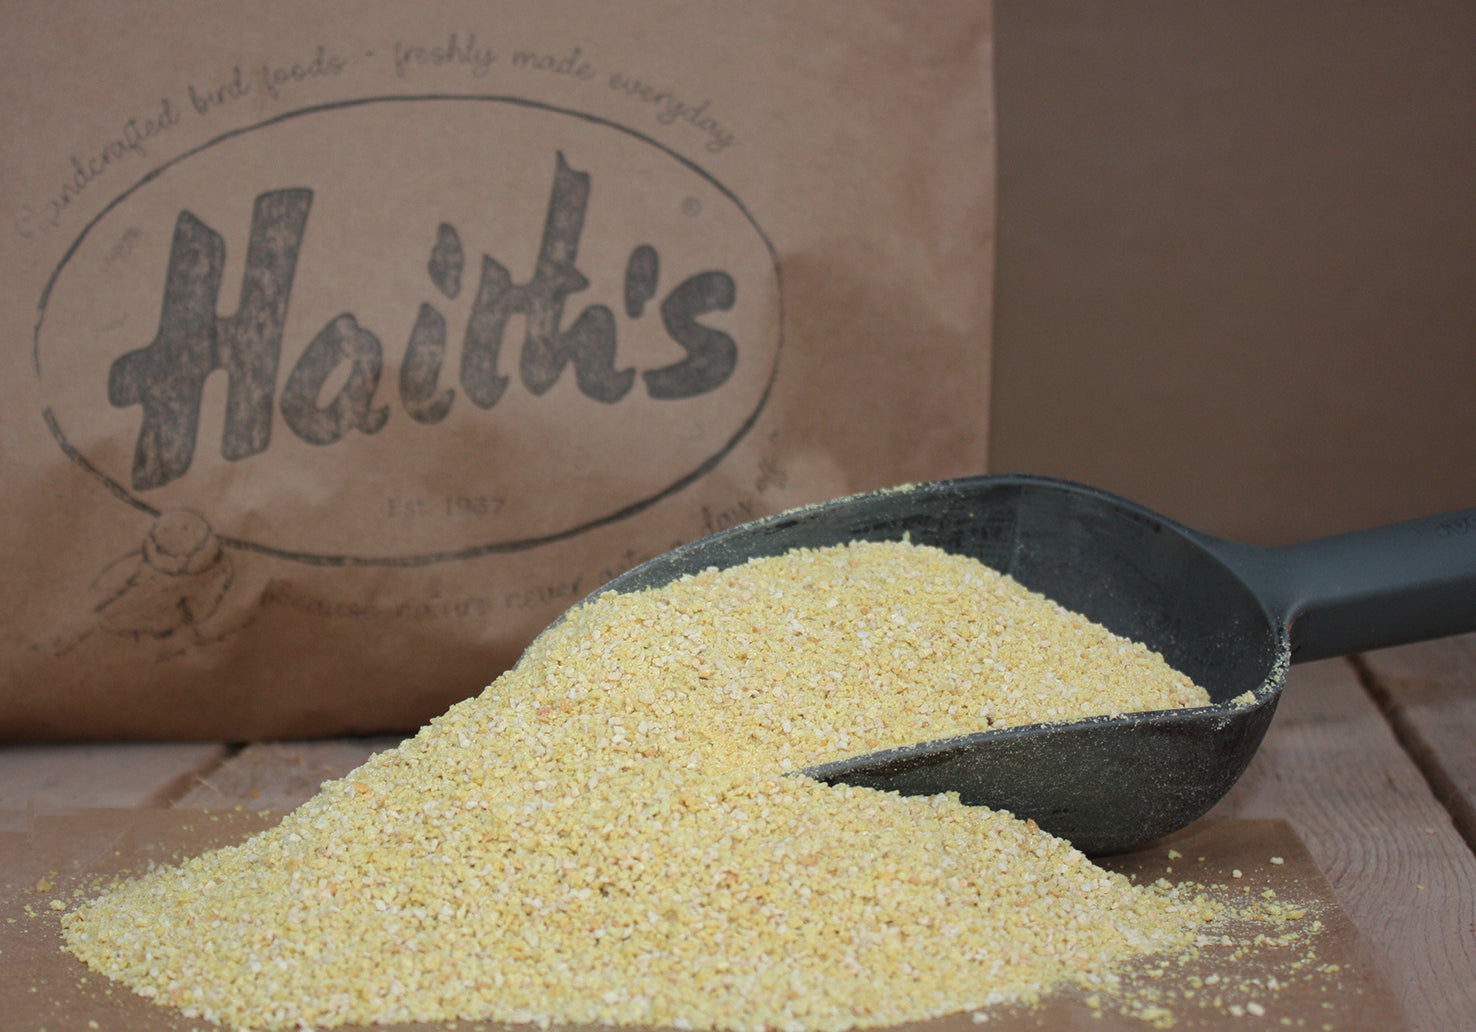 Haith's rearing and conditioning seed inside a scoop with a paper bag in the background 